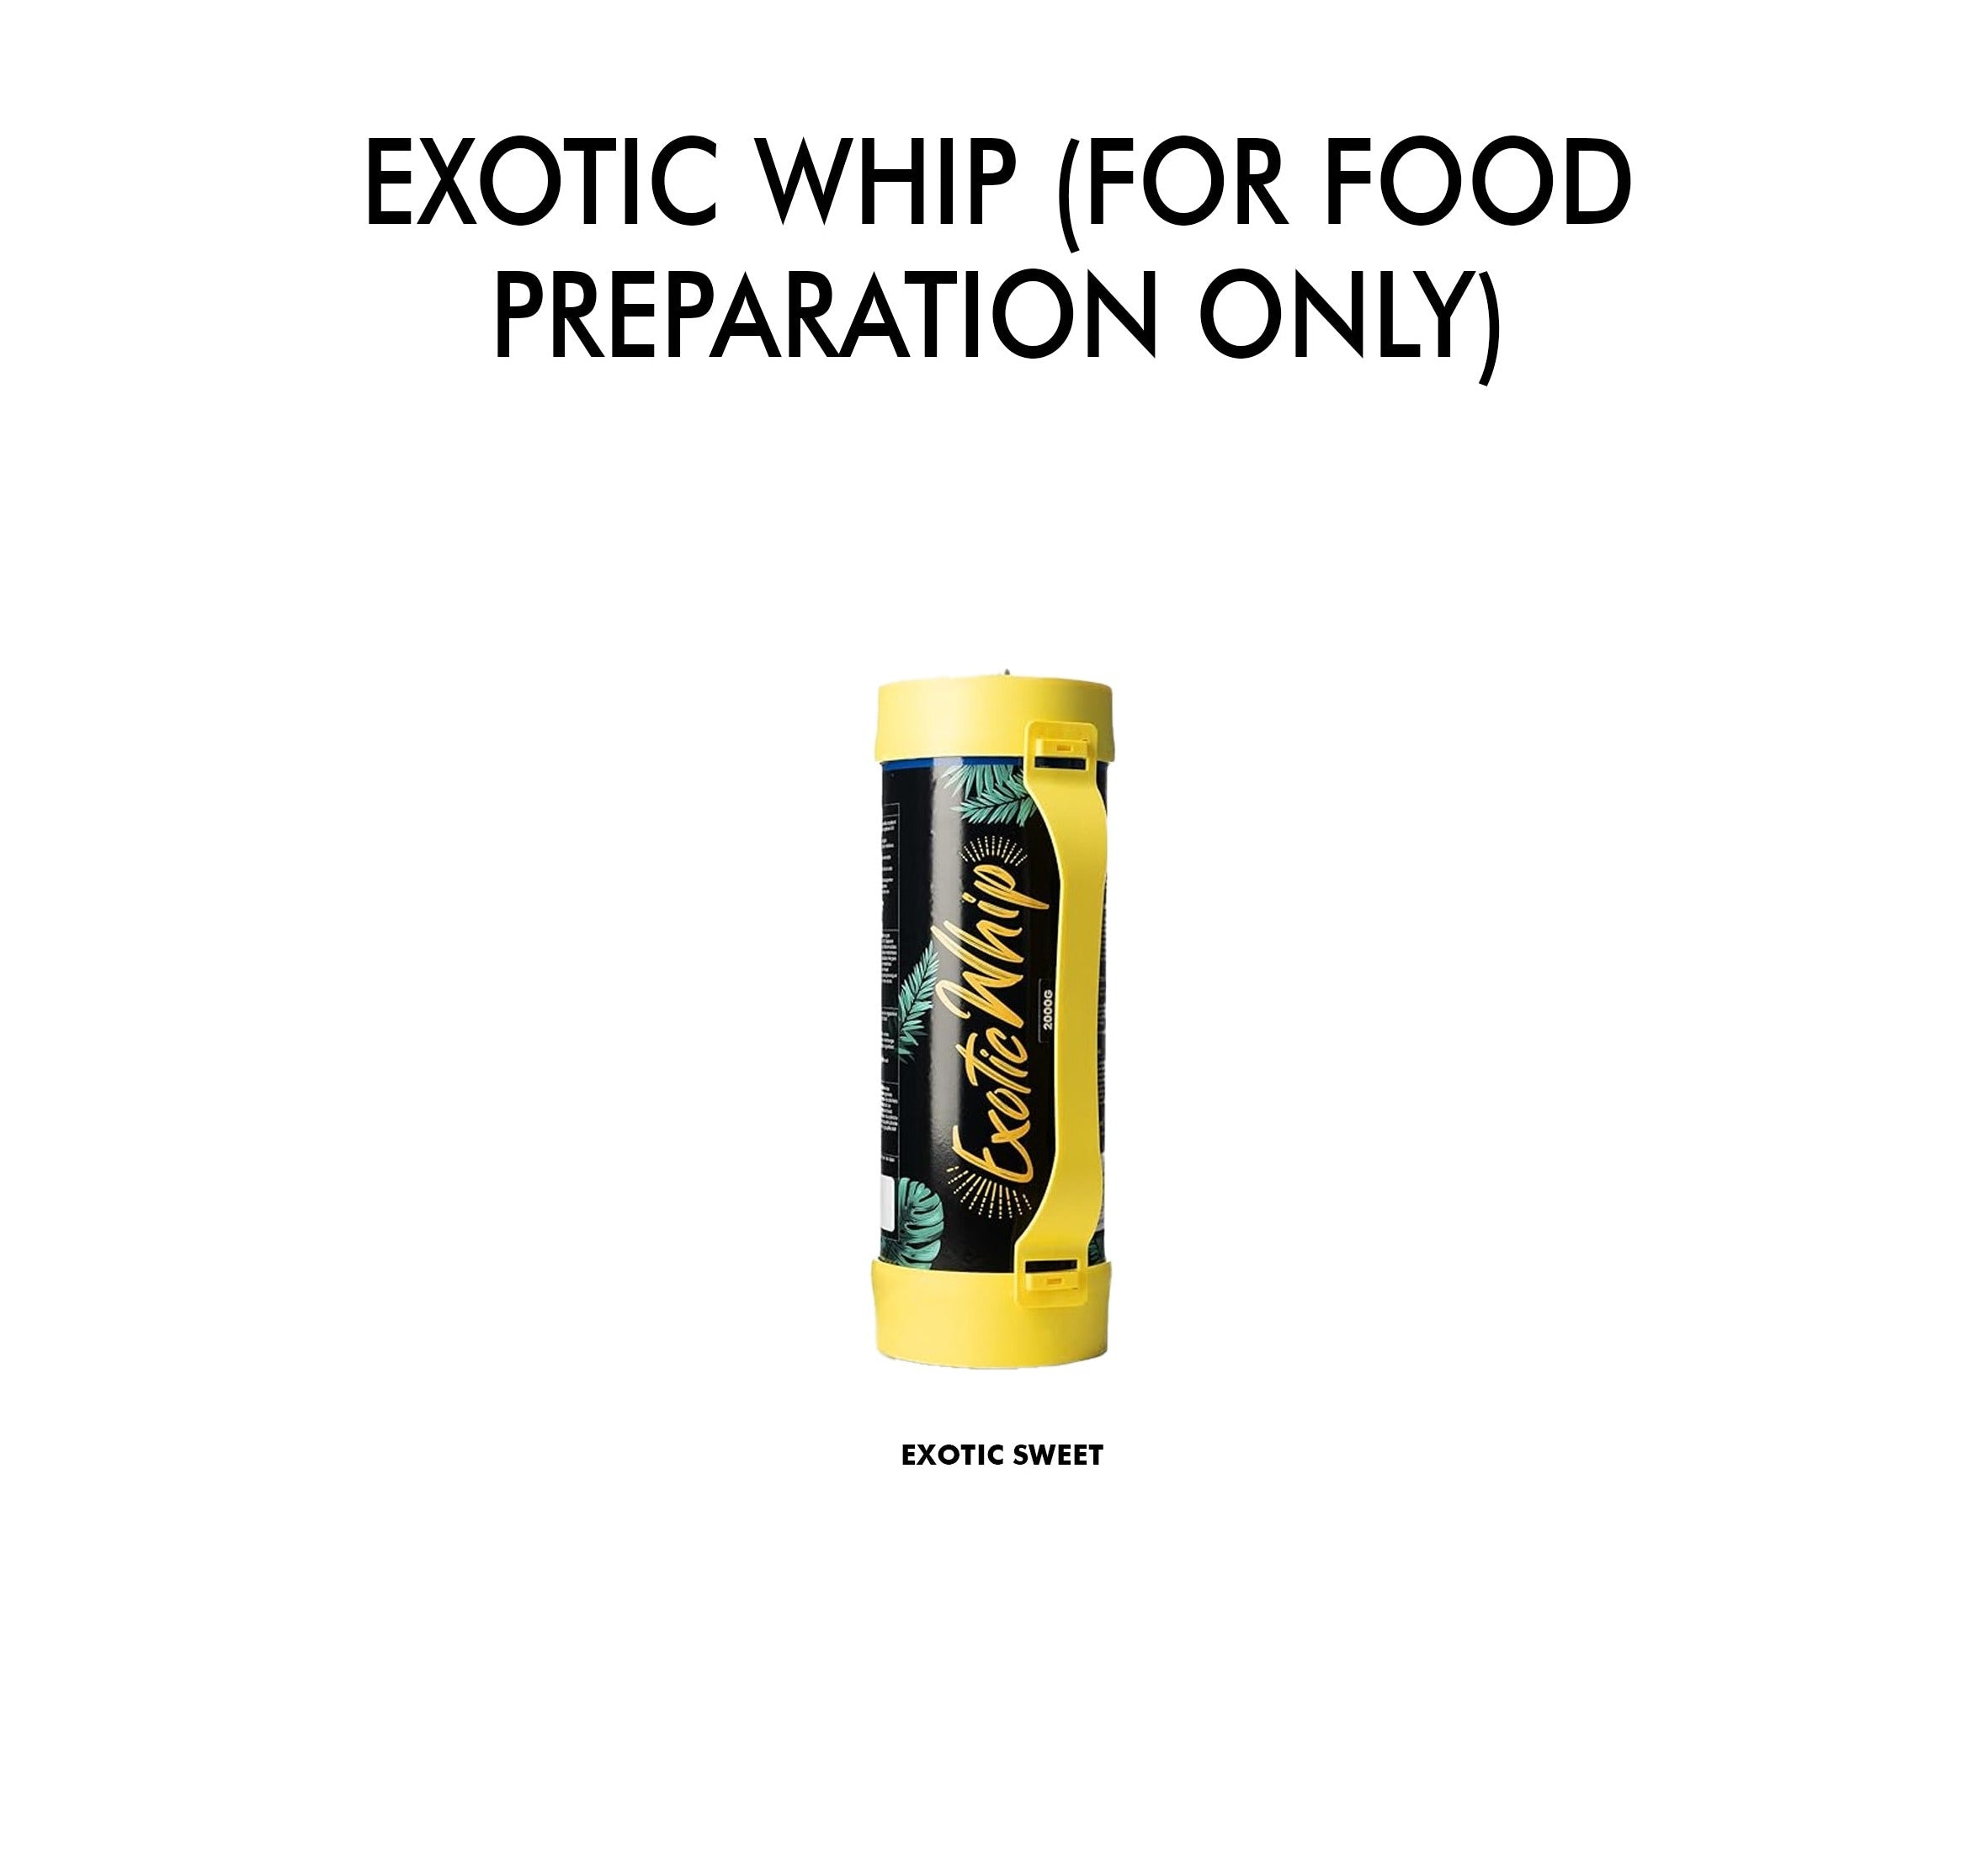 Exotic Whip (for food preparation only)